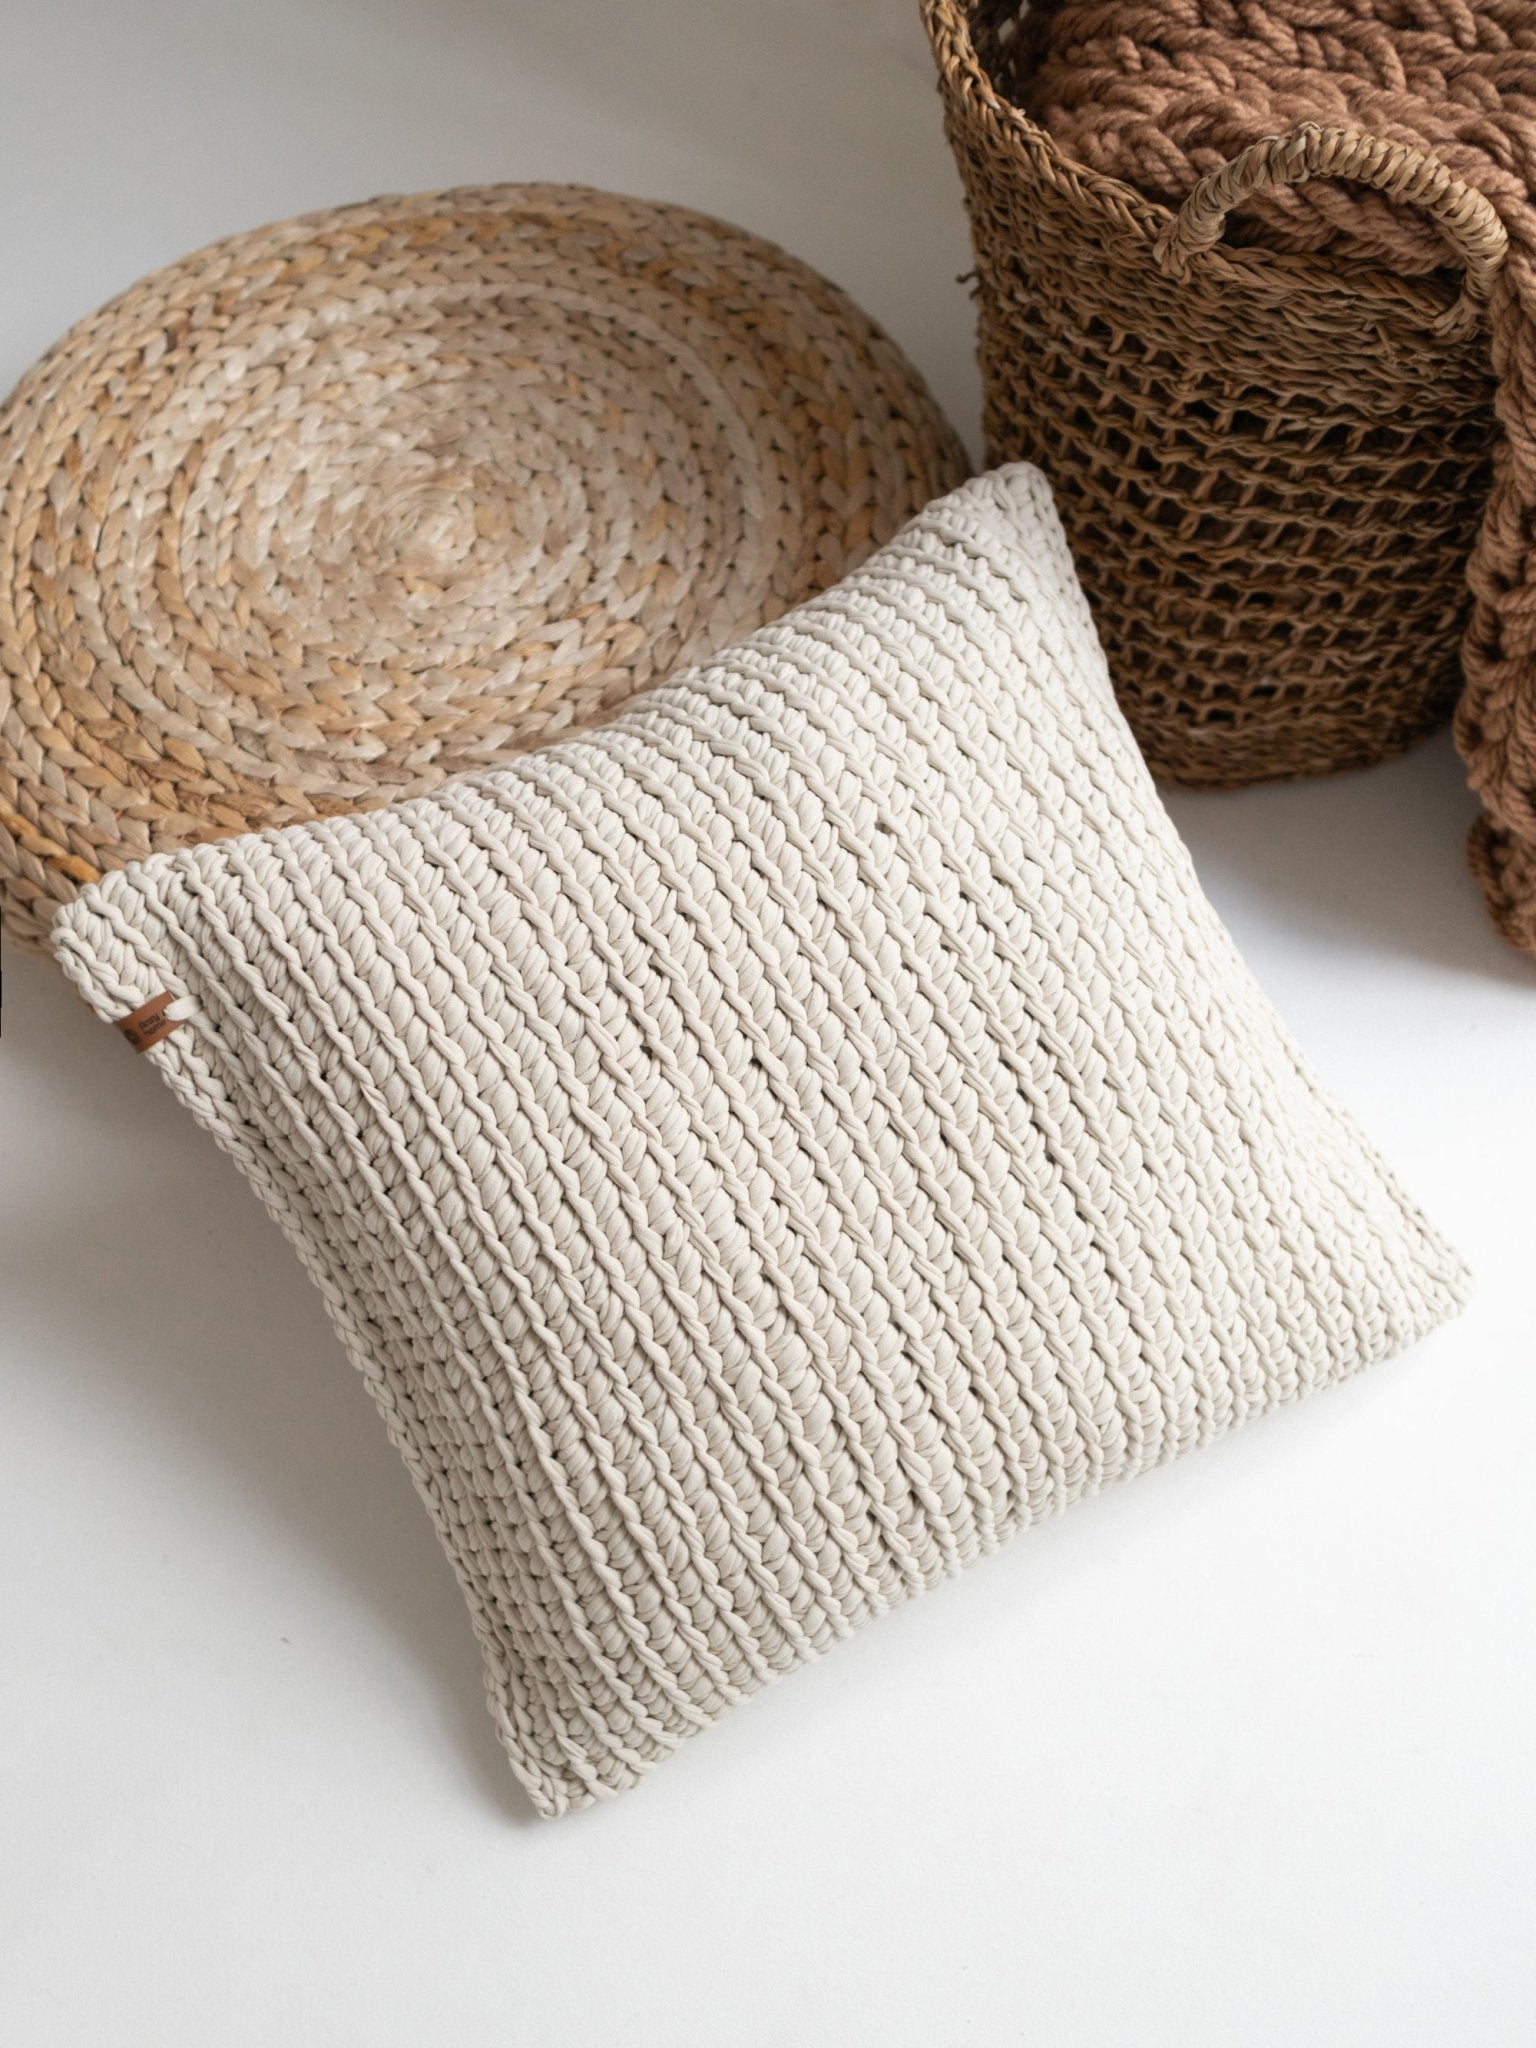 TEXTURED HANDKNIT PILLOW IVORY 20” - The Modern Heritage